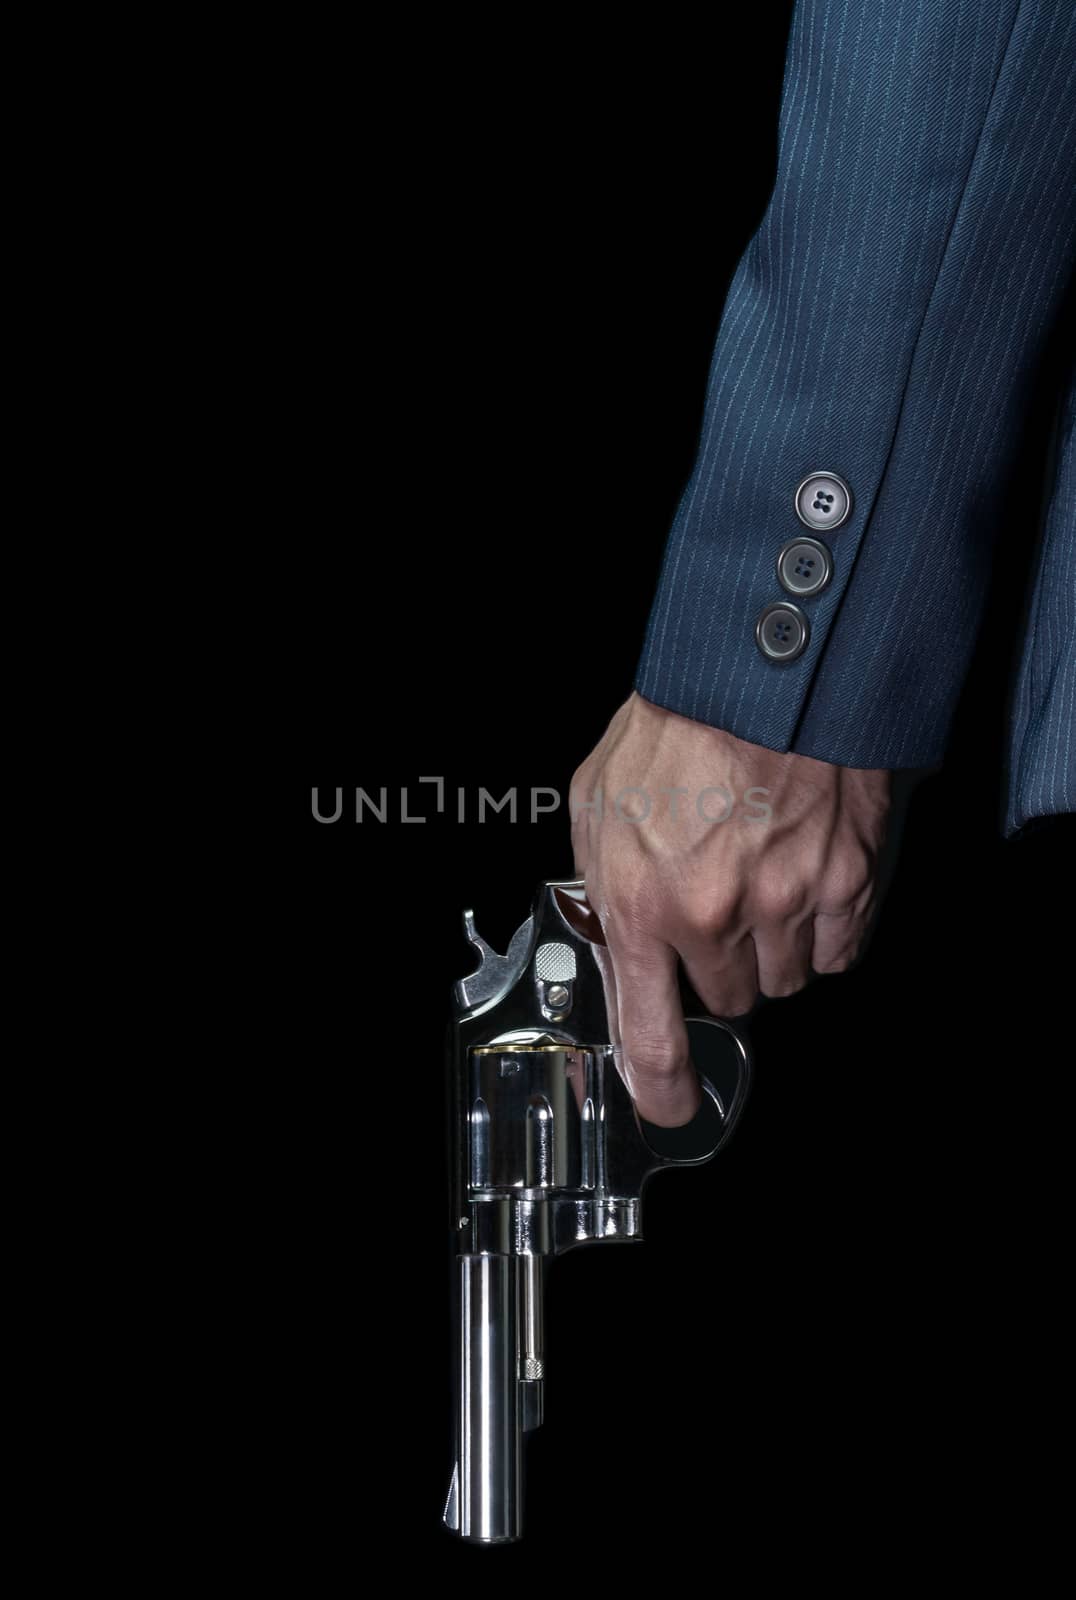 Man Hold Stainless Gun or Shooter in Left Hand in Book Cover Style. Fake Stainless Gun or Shooter in Left Hand portrait view for criminal or violence concept